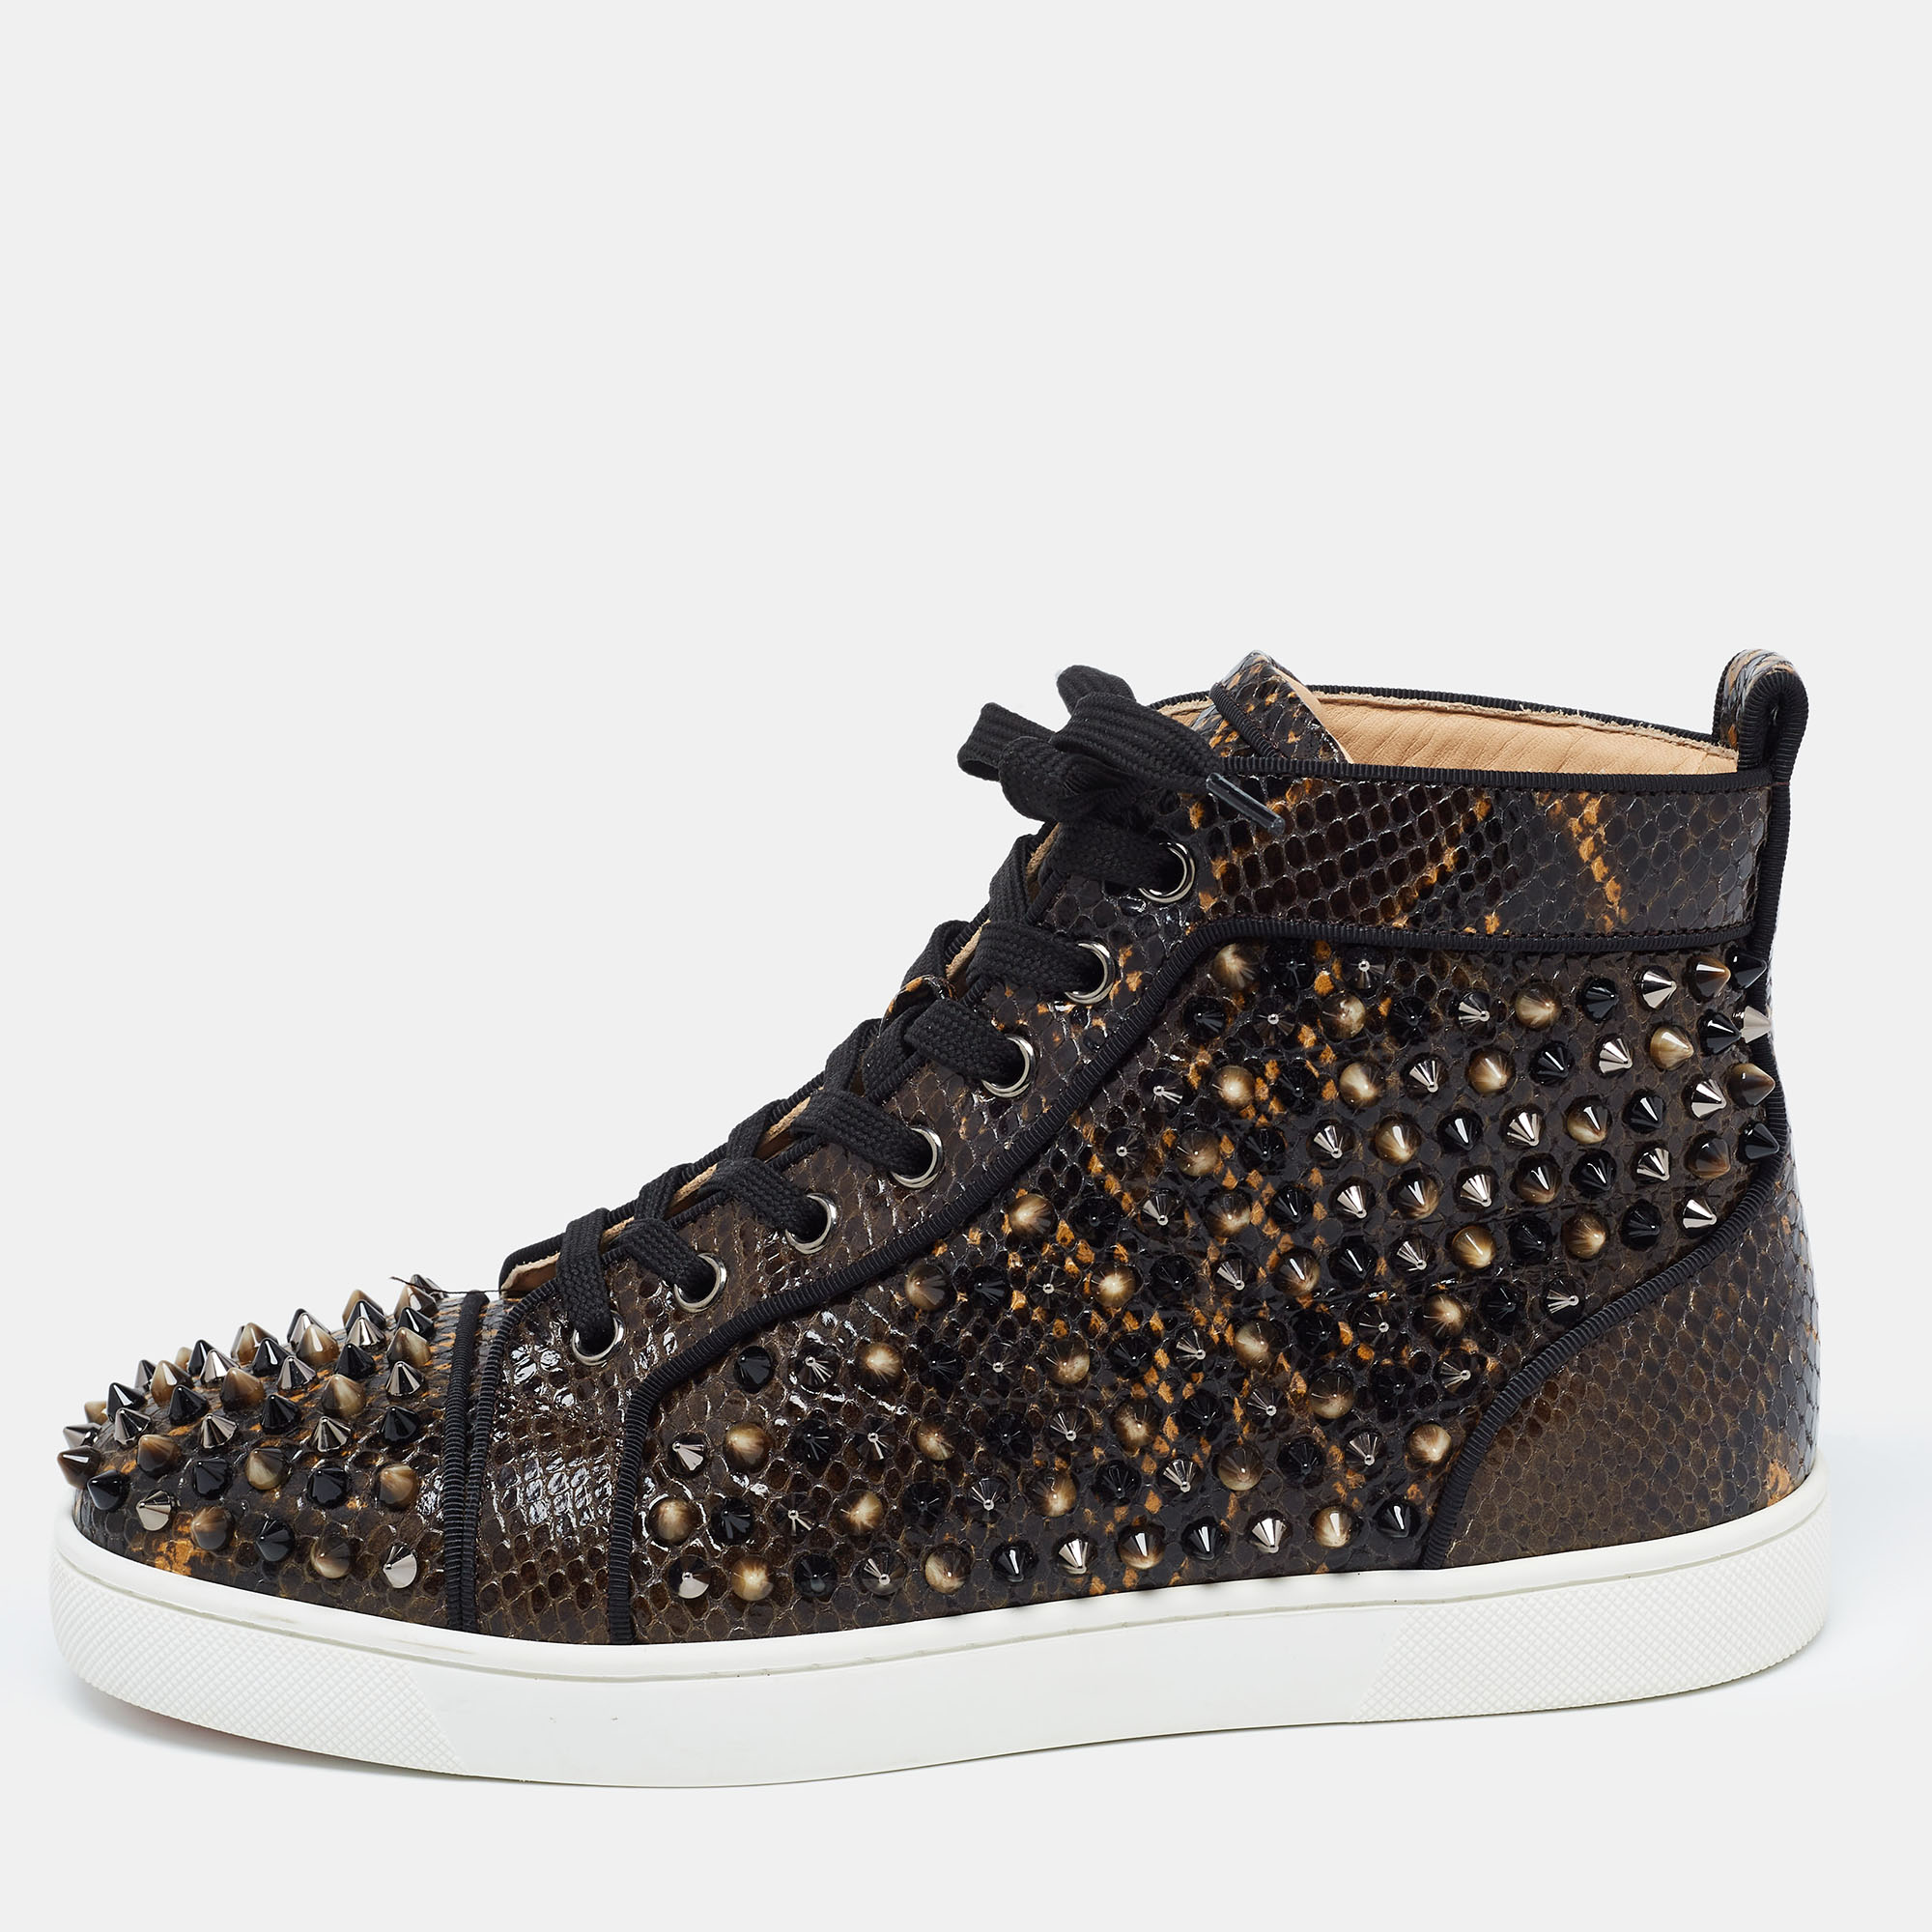 Christian Louboutin Brown/Black Embossed Snakeskin Louis Spikes High Top Sneakers Size 39.5